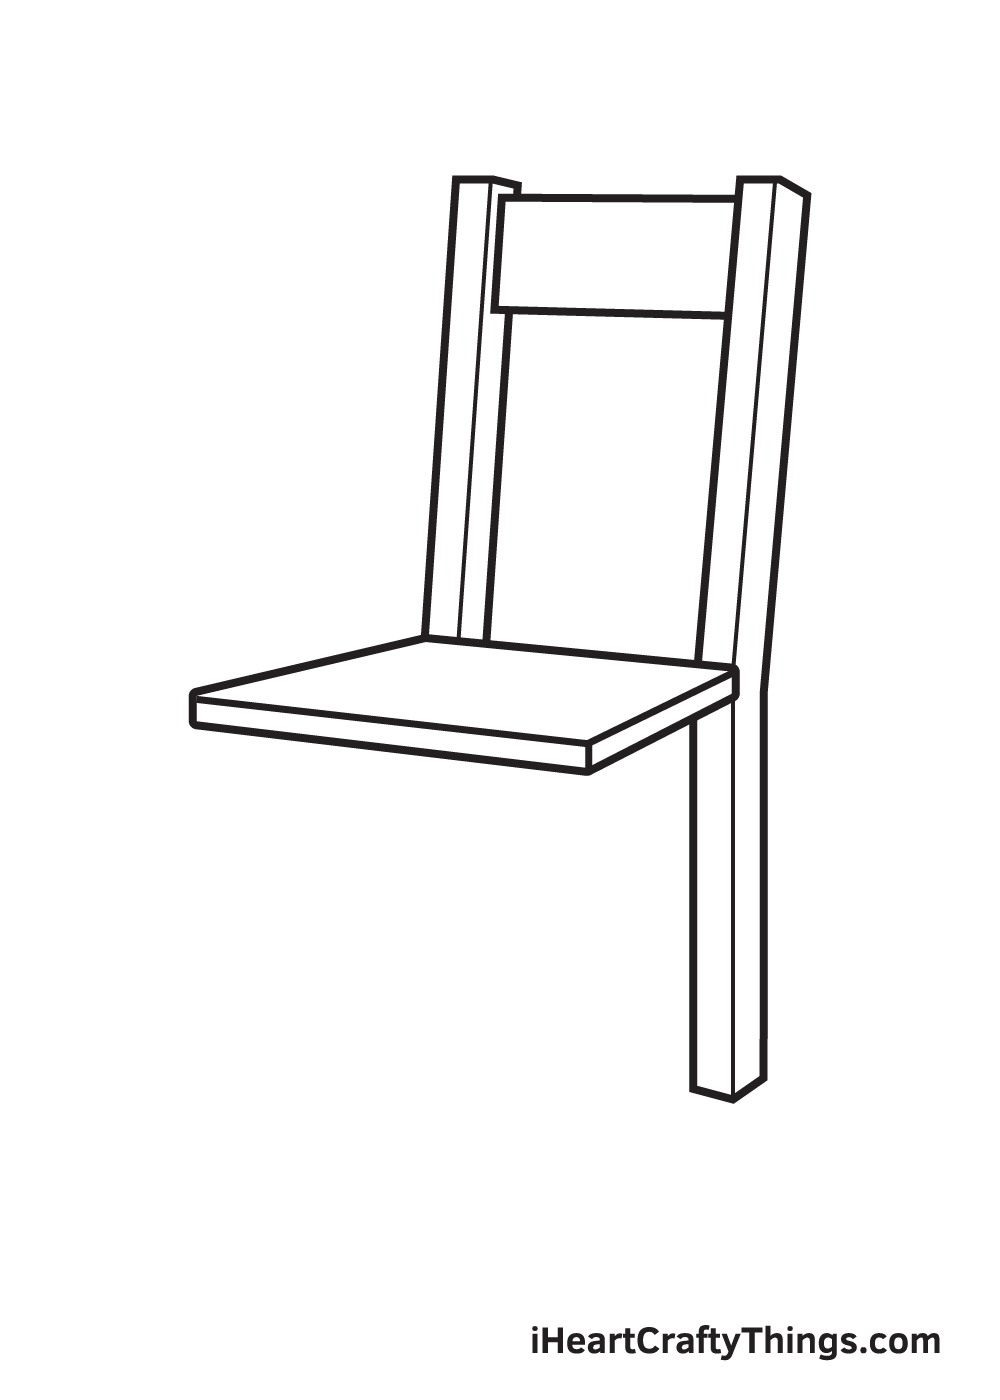 Drawing a chair - Step 4